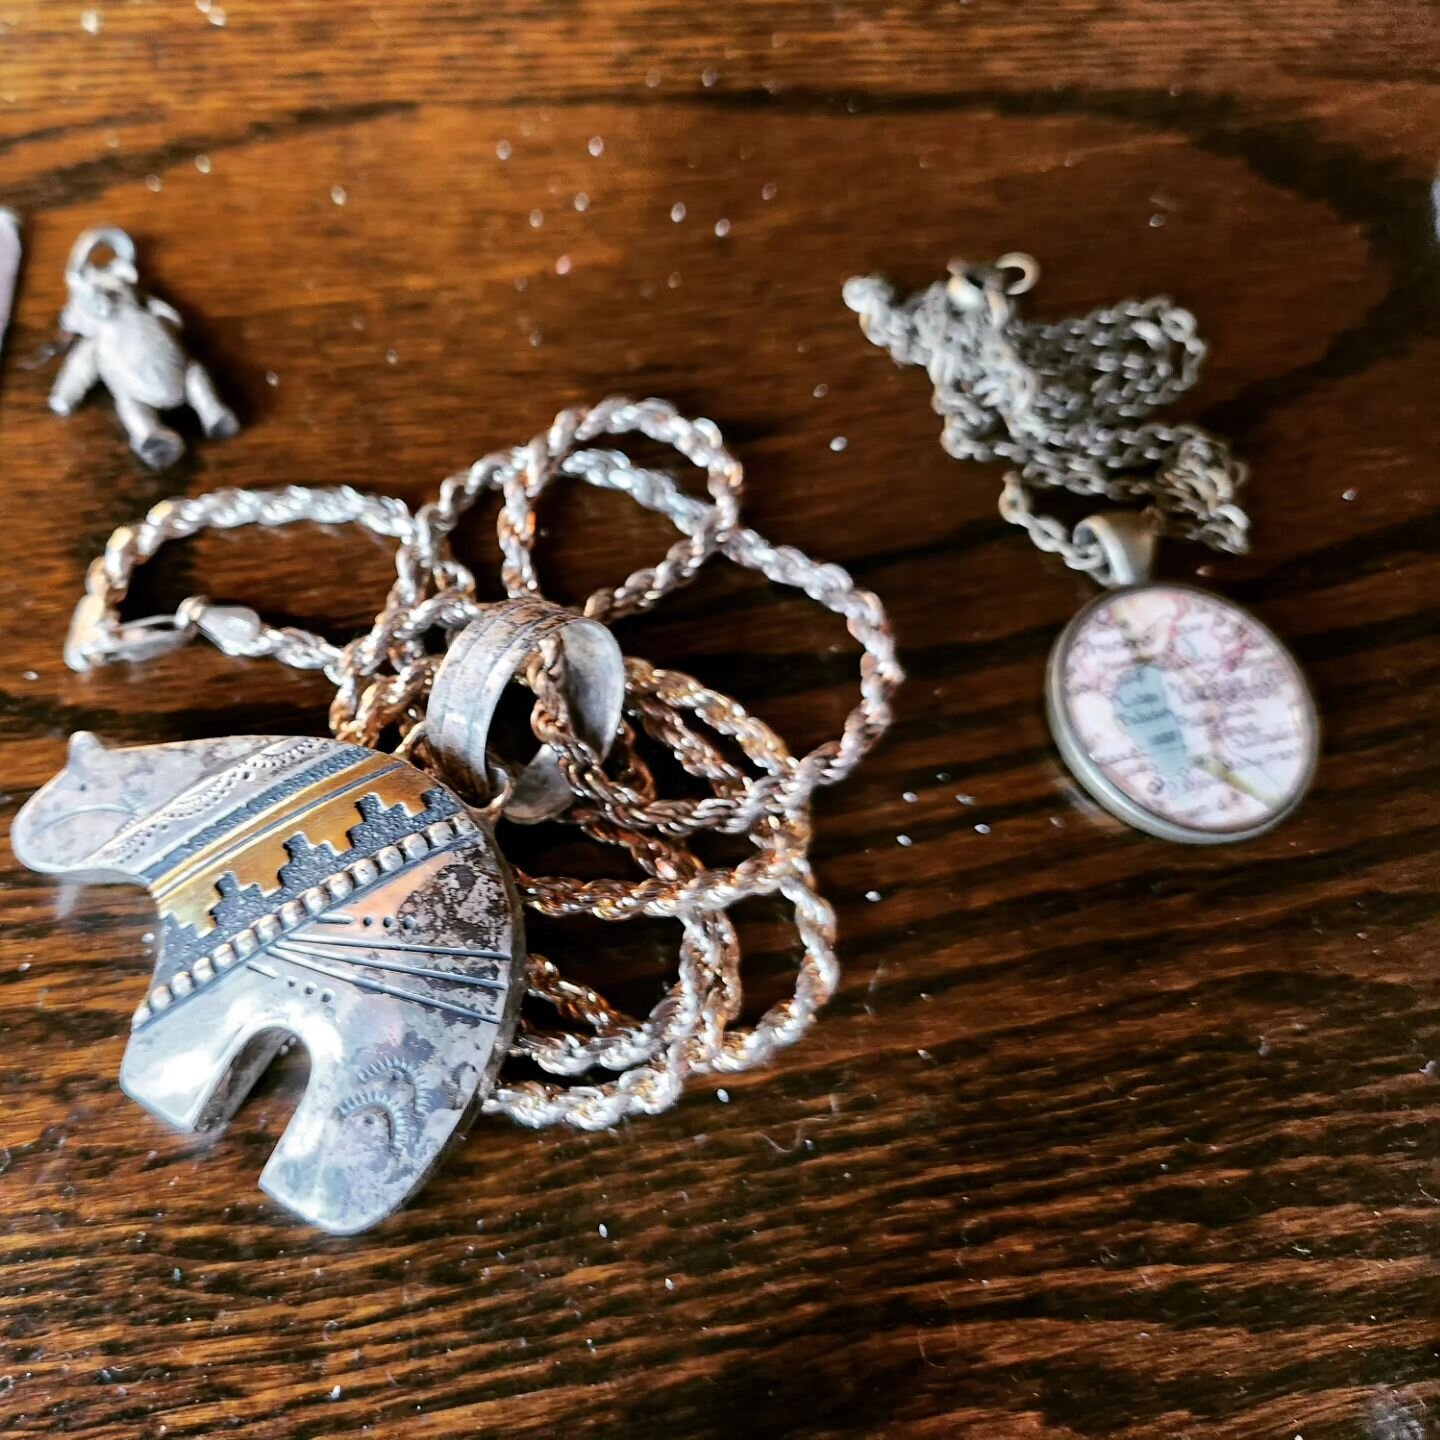 We now carry a wide assortment of vintage, silver, and antique jewelry. #antiquejewelry #vintagejewelry #salvagesistersgunnison #wildfindsgunnison